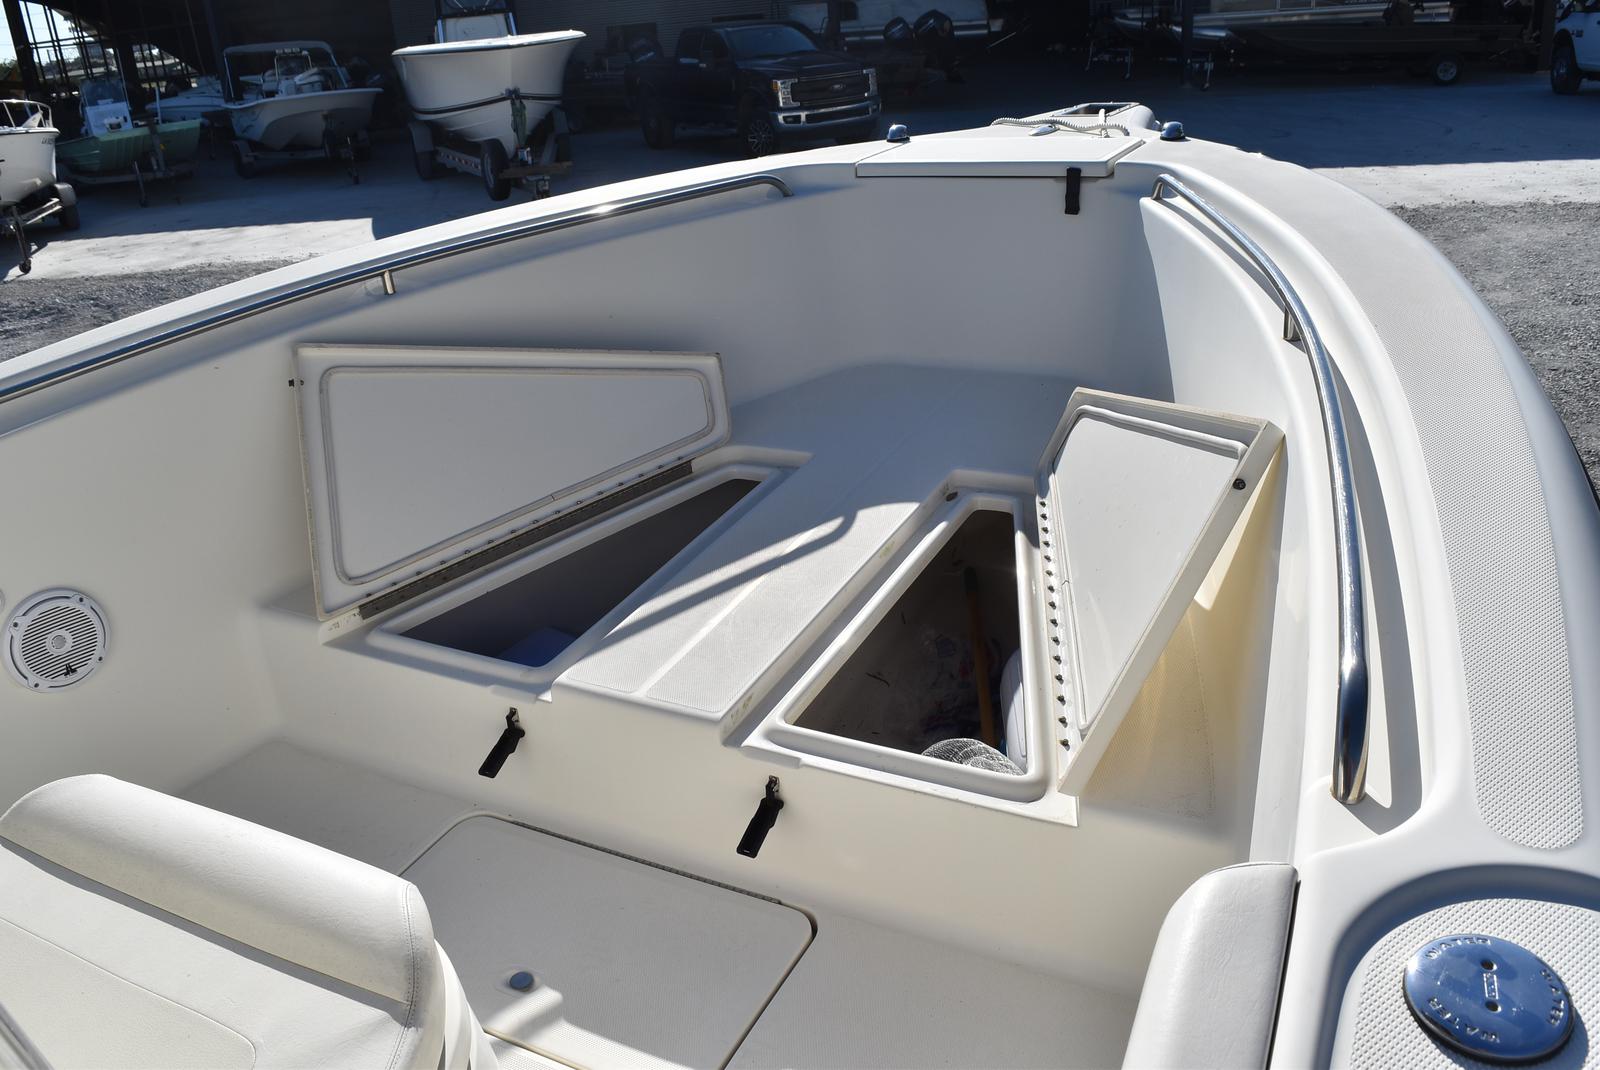 2006 Triton boat for sale, model of the boat is 2486 & Image # 21 of 24